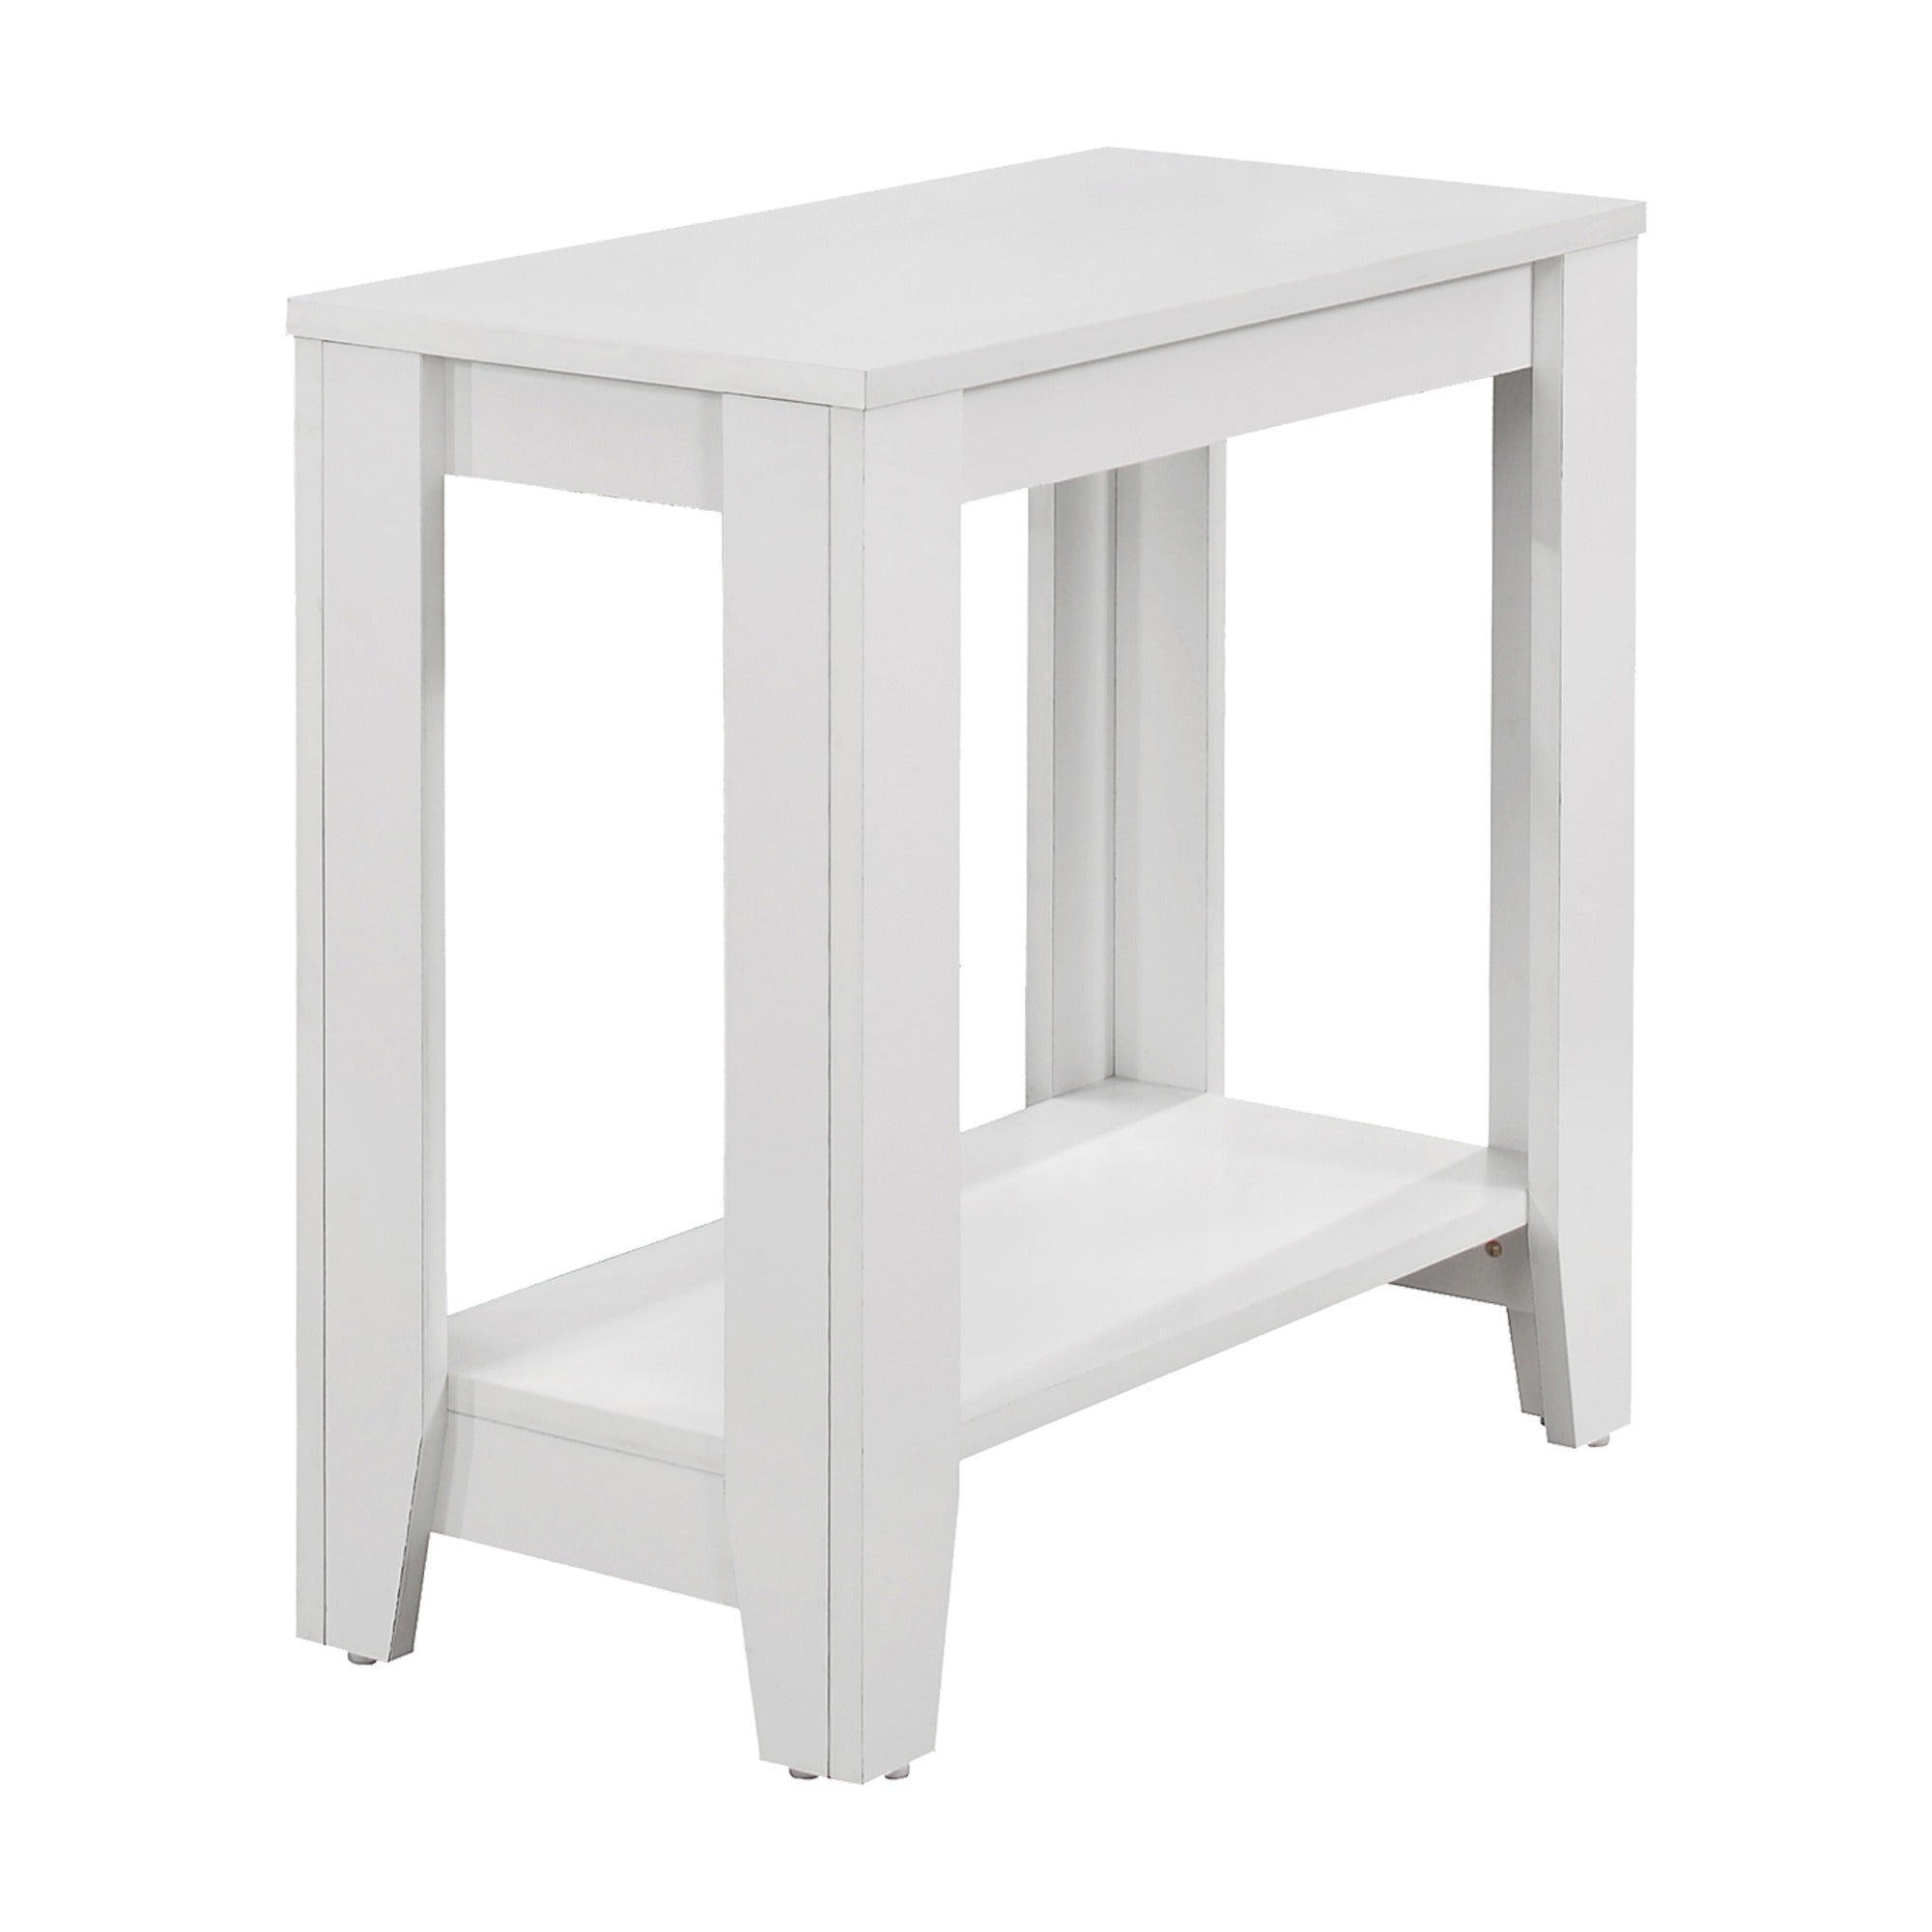 ACCENT TABLE - DARK TAUPE